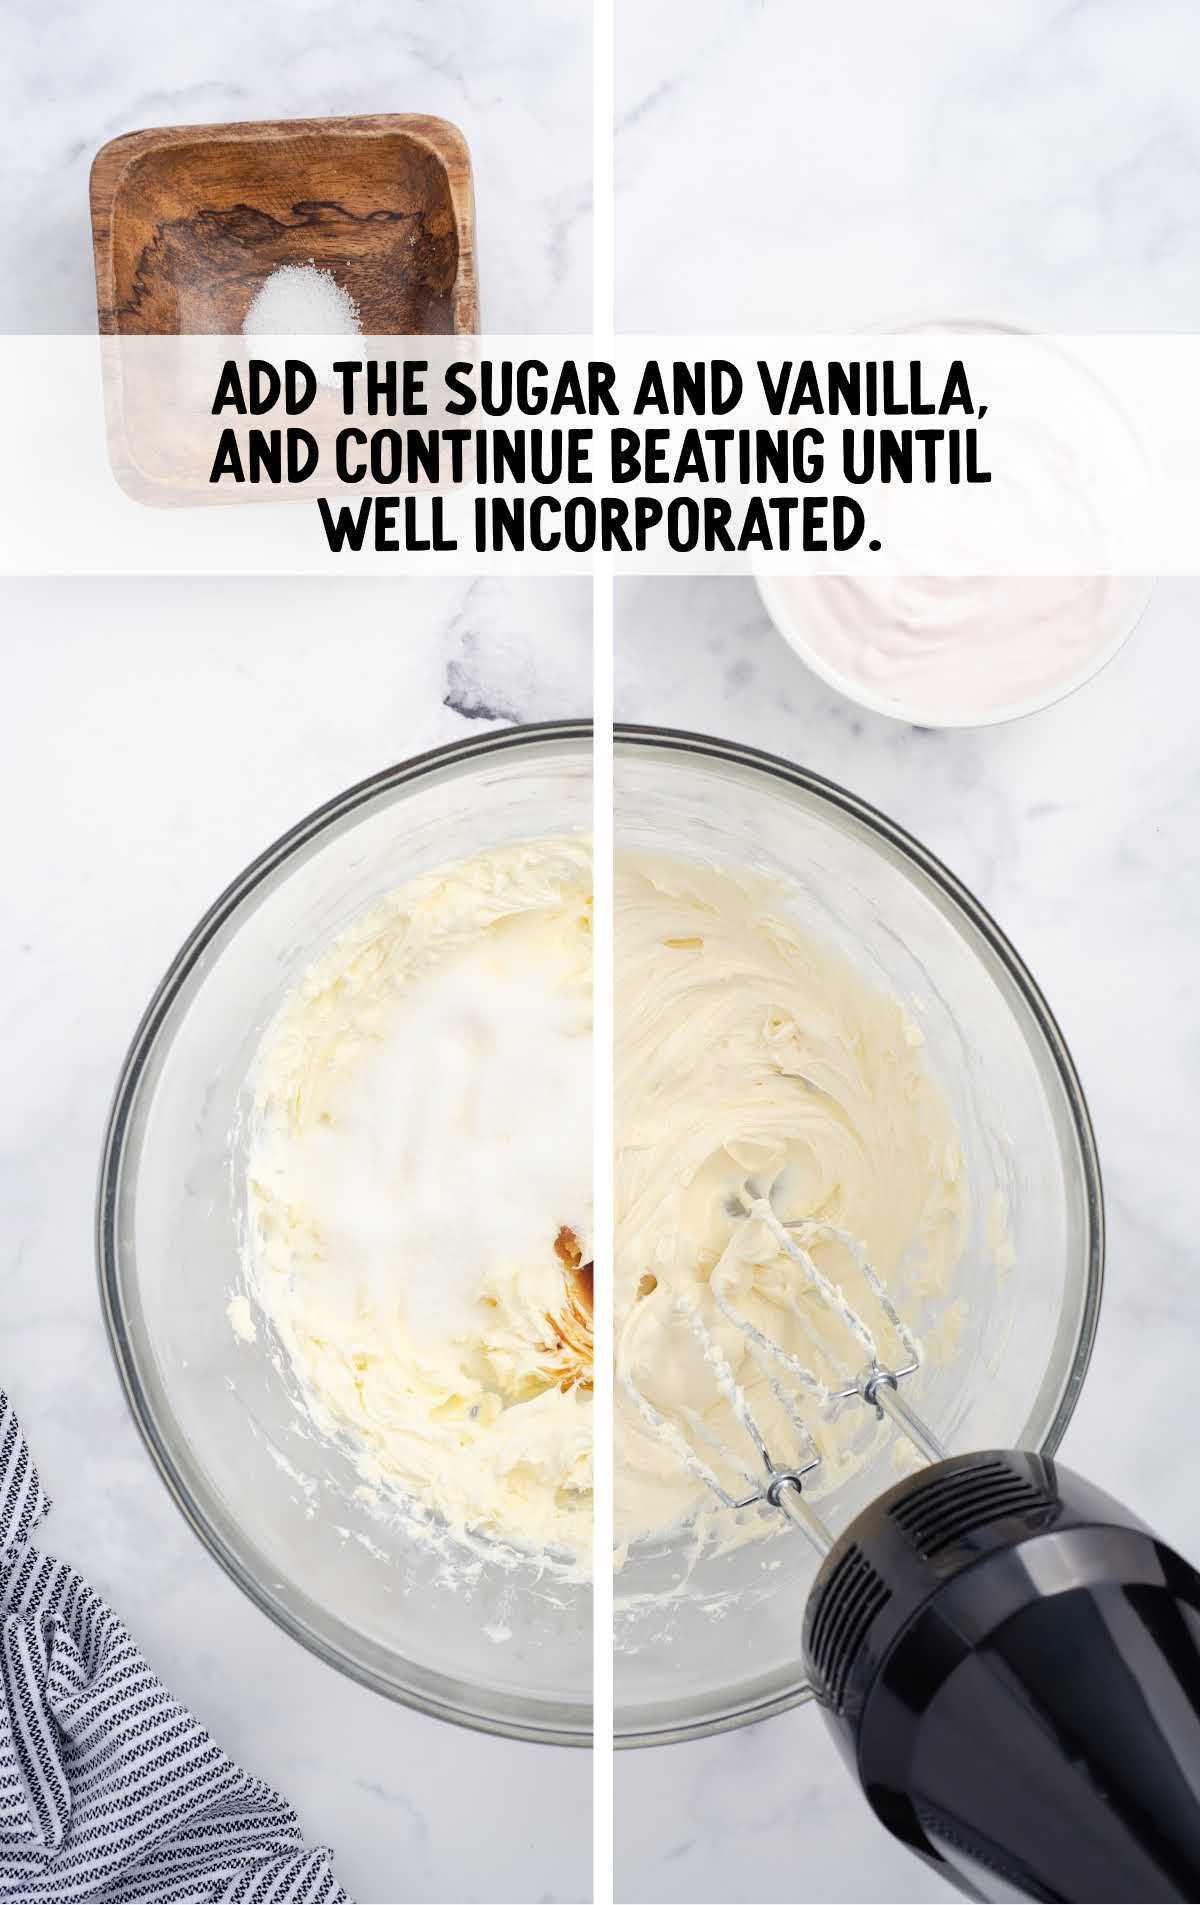 sugar and vanilla added to the softened cream in a bowl